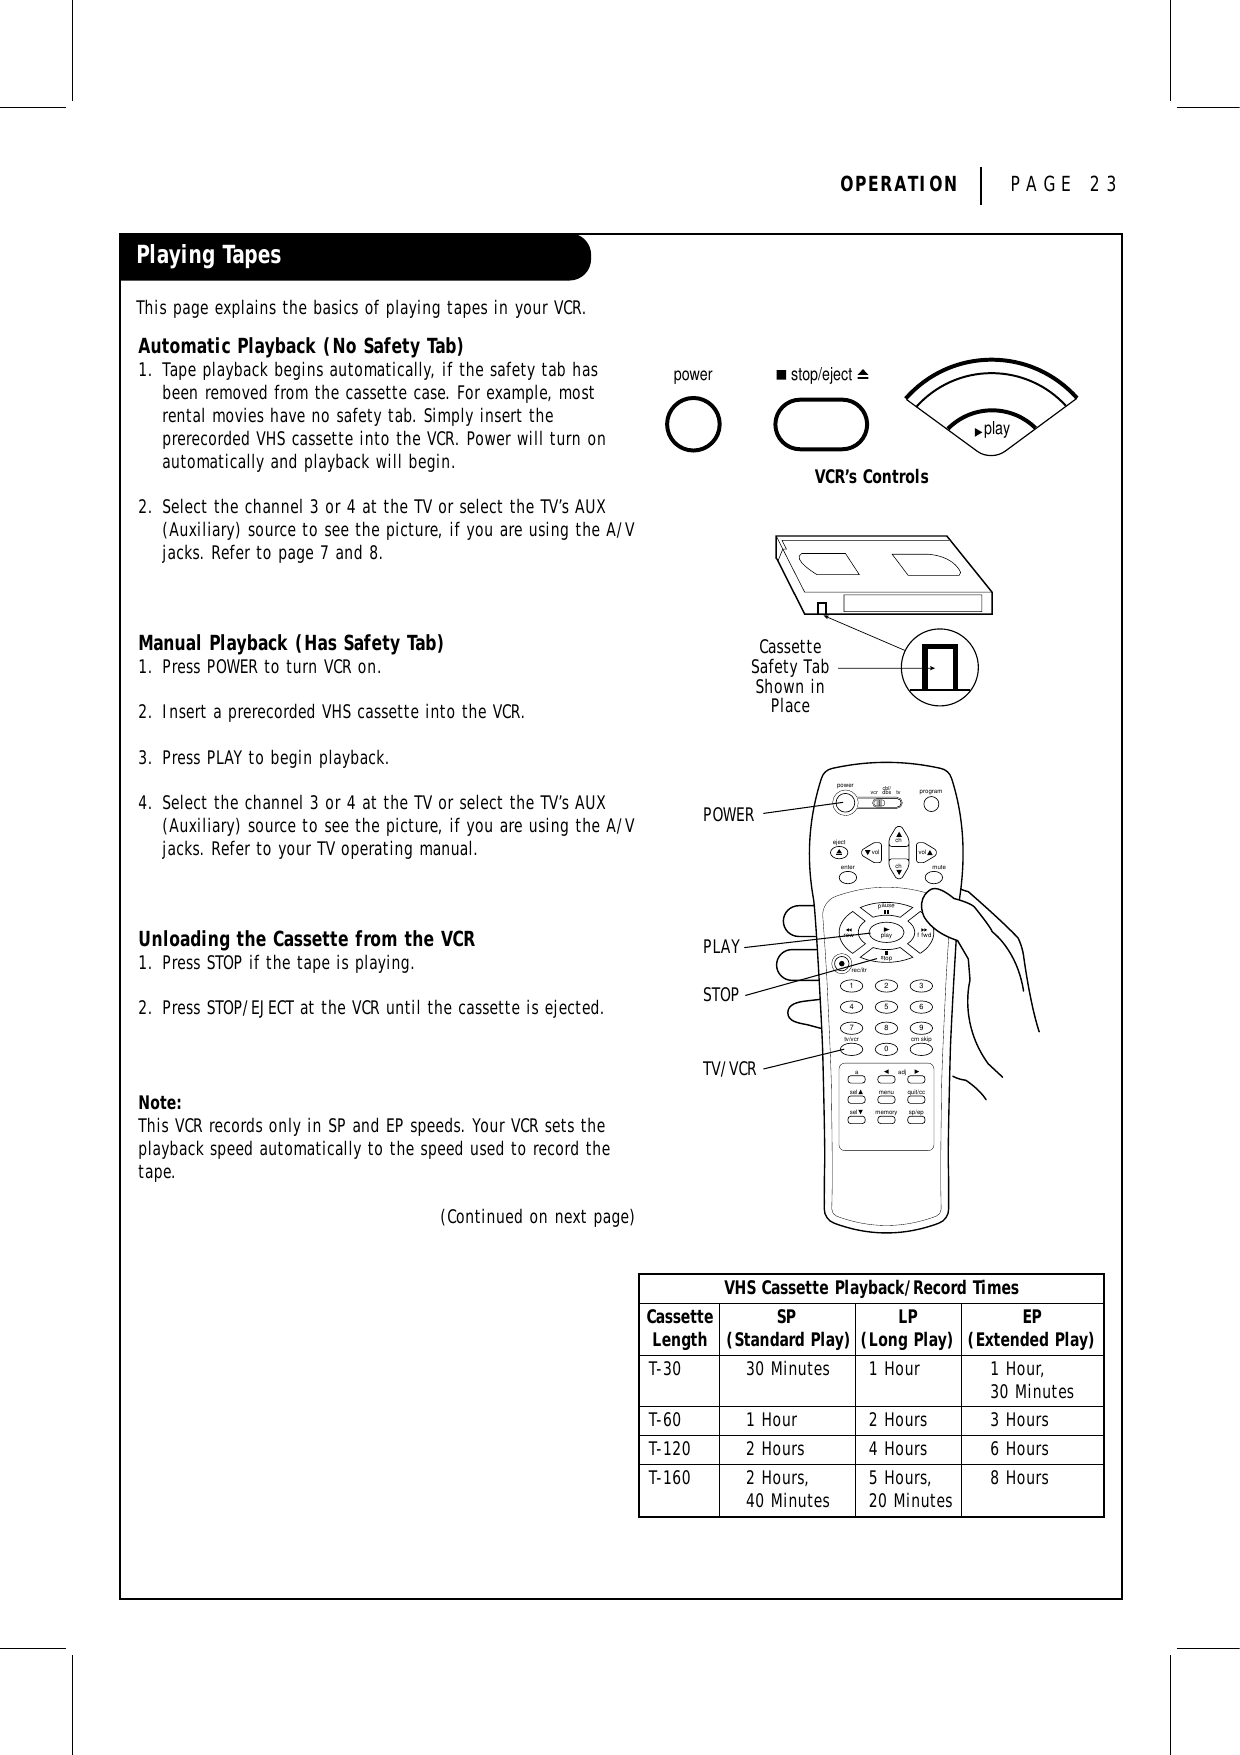 OPERATION PAGE 23Playing TapesThis page explains the basics of playing tapes in your VCR.Automatic Playback (No Safety Tab)1. Tape playback begins automatically, if the safety tab hasbeen removed from the cassette case. For example, mostrental movies have no safety tab. Simply insert theprerecorded VHS cassette into the VCR. Power will turn onautomatically and playback will begin.2. Select the channel 3 or 4 at the TV or select the TV’s AUX(Auxiliary) source to see the picture, if you are using the A/Vjacks. Refer to page 7 and 8.Manual Playback (Has Safety Tab)1. Press POWER to turn VCR on.2. Insert a prerecorded VHS cassette into the VCR.3. Press PLAY to begin playback.4. Select the channel 3 or 4 at the TV or select the TV’s AUX(Auxiliary) source to see the picture, if you are using the A/Vjacks. Refer to your TV operating manual.Unloading the Cassette from the VCR1. Press STOP if the tape is playing.2. Press STOP/EJECT at the VCR until the cassette is ejected.Note:This VCR records only in SP and EP speeds. Your VCR sets theplayback speed automatically to the speed used to record thetape.(Continued on next page)CassetteSafety TabShown inPlaceVHS Cassette Playback/Record TimesCassette SP LP EPLength (Standard Play) (Long Play) (Extended Play)T-30 30 Minutes 1 Hour 1 Hour,30 MinutesT-60 1 Hour 2 Hours 3 HoursT-120 2 Hours 4 Hours 6 HoursT-160 2 Hours, 5 Hours, 8 Hours40 Minutes 20 Minutesvcr cbl/dbs tvpower programchchvolvolejectenter muterec/itr123456789tv/vcradja0cm skipselselmenu quit/ccmemory sp/eppausestopplayrew f fwdPOWERPLAYSTOPTV/VCRstop/ejectpowerplayVCR’s Controls